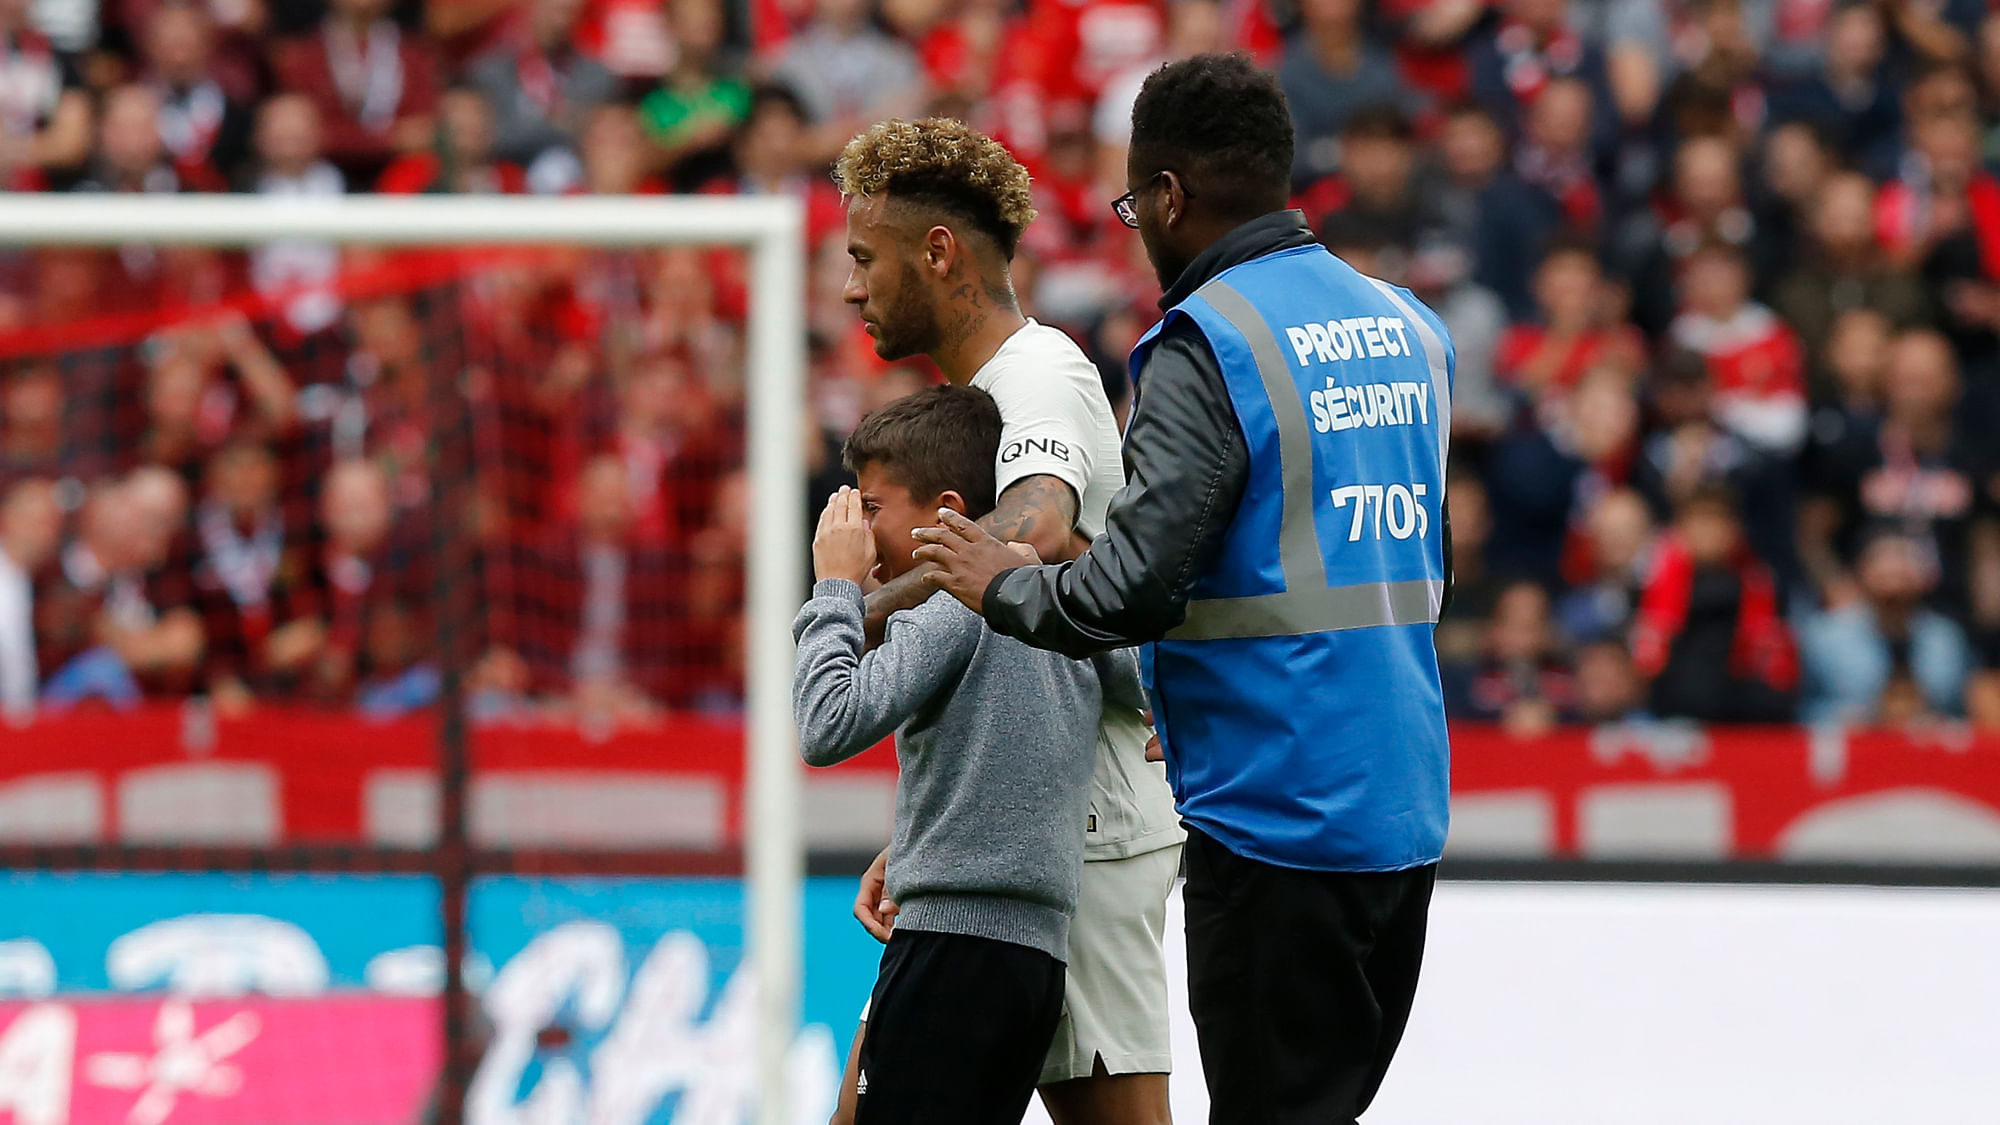 PSG’s Neymar shields a crying boy who ran onto the pitch from a security guard after their French League One soccer match between Rennes and Paris-Saint-Germain at Roazhon Park stadium in Rennes, western France, Sunday, Sept. 23, 2018.&nbsp;